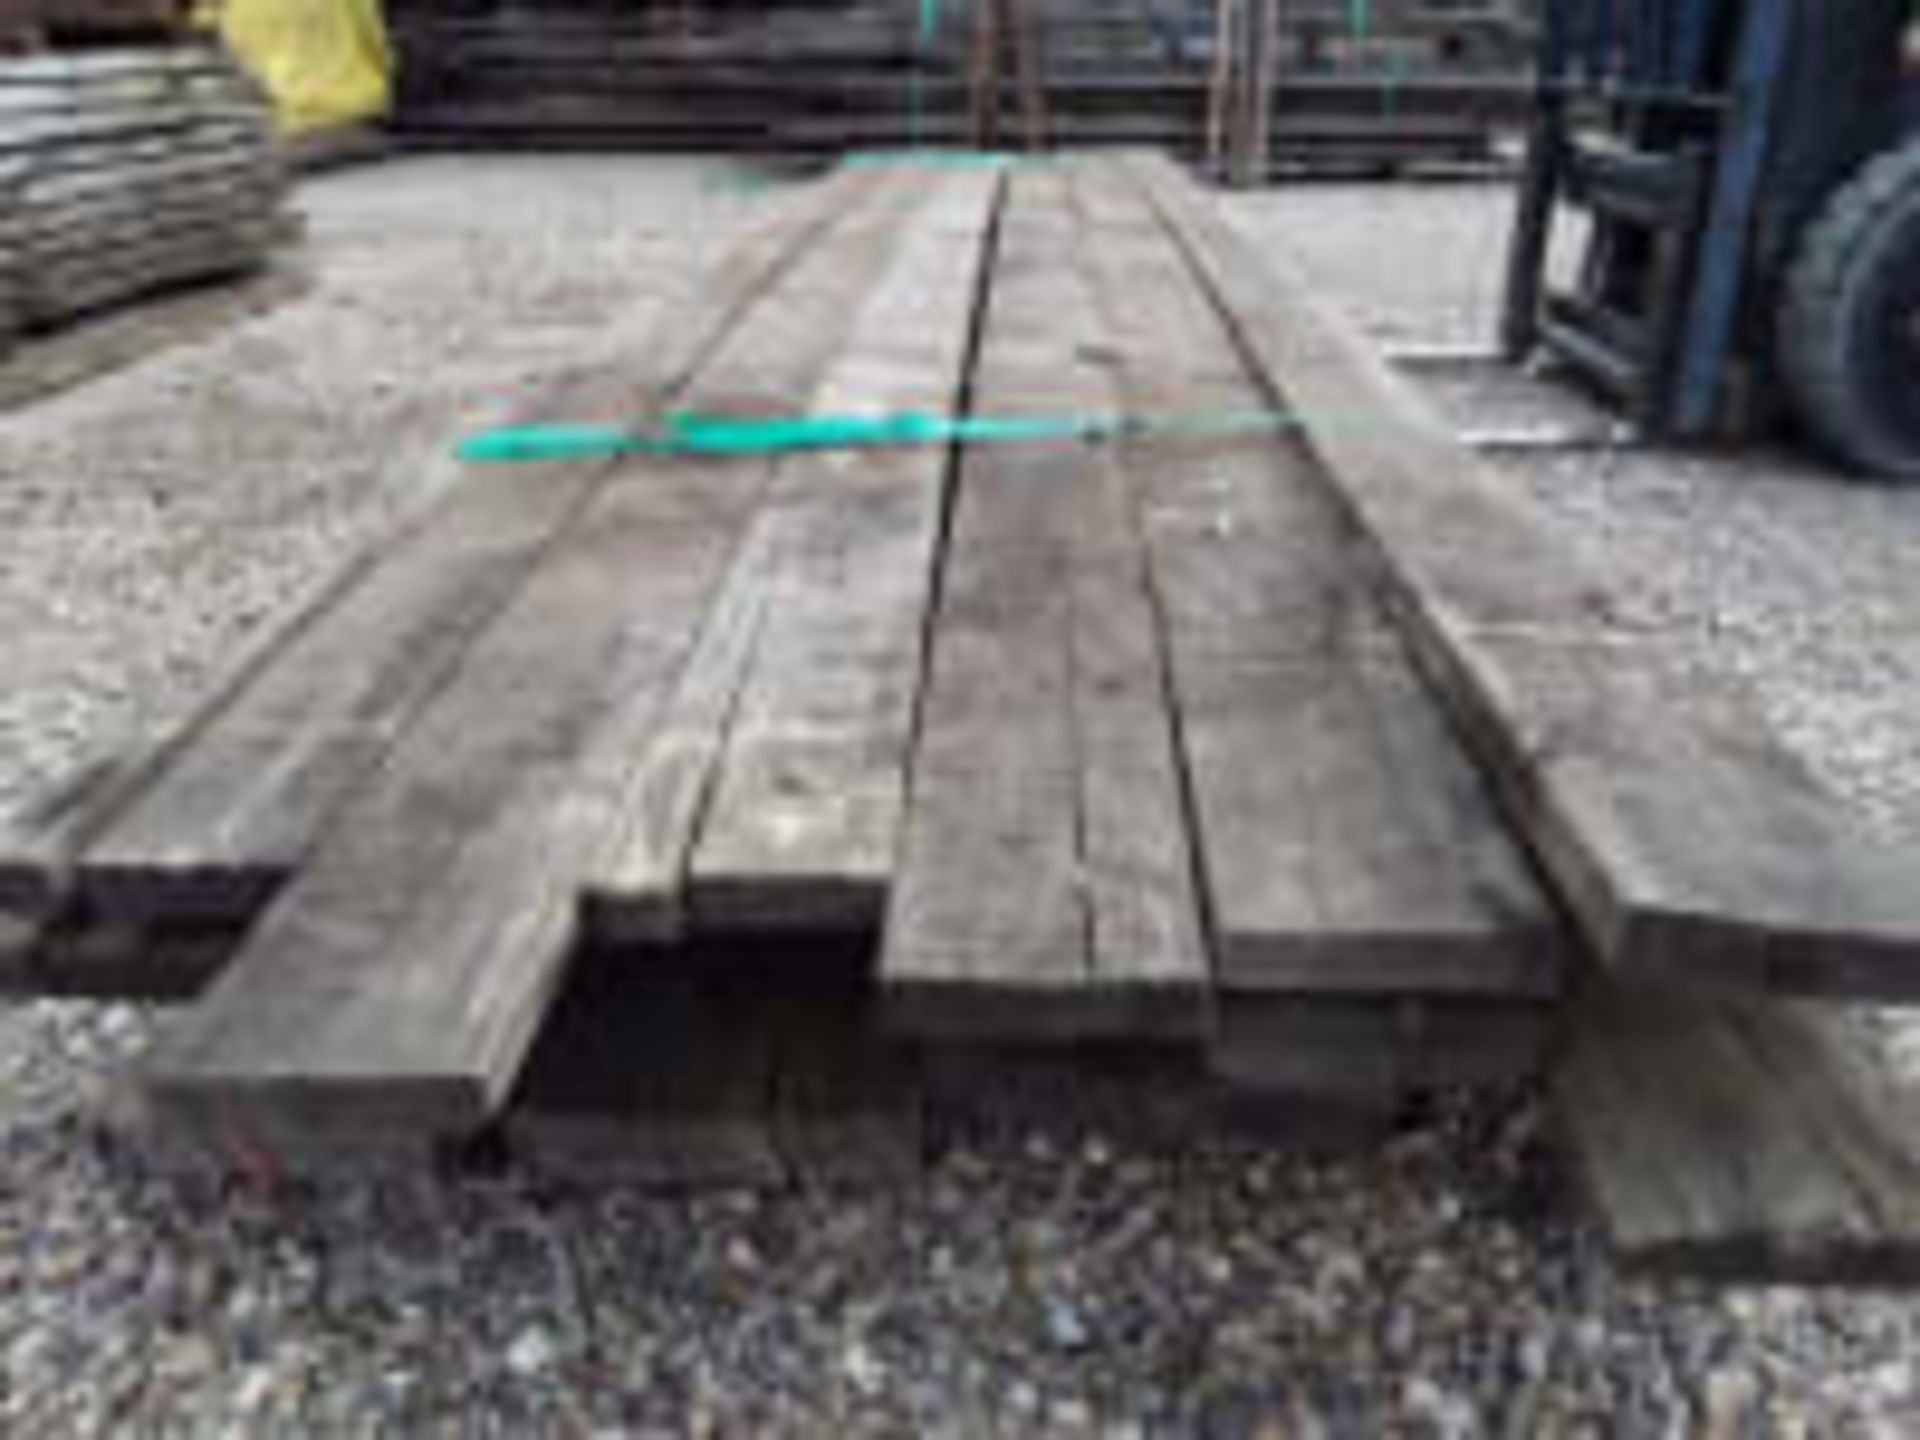 18 x Hardwood Air Dried Sawn Timber English Oak Square Edged Boards / Slabs - Image 3 of 8